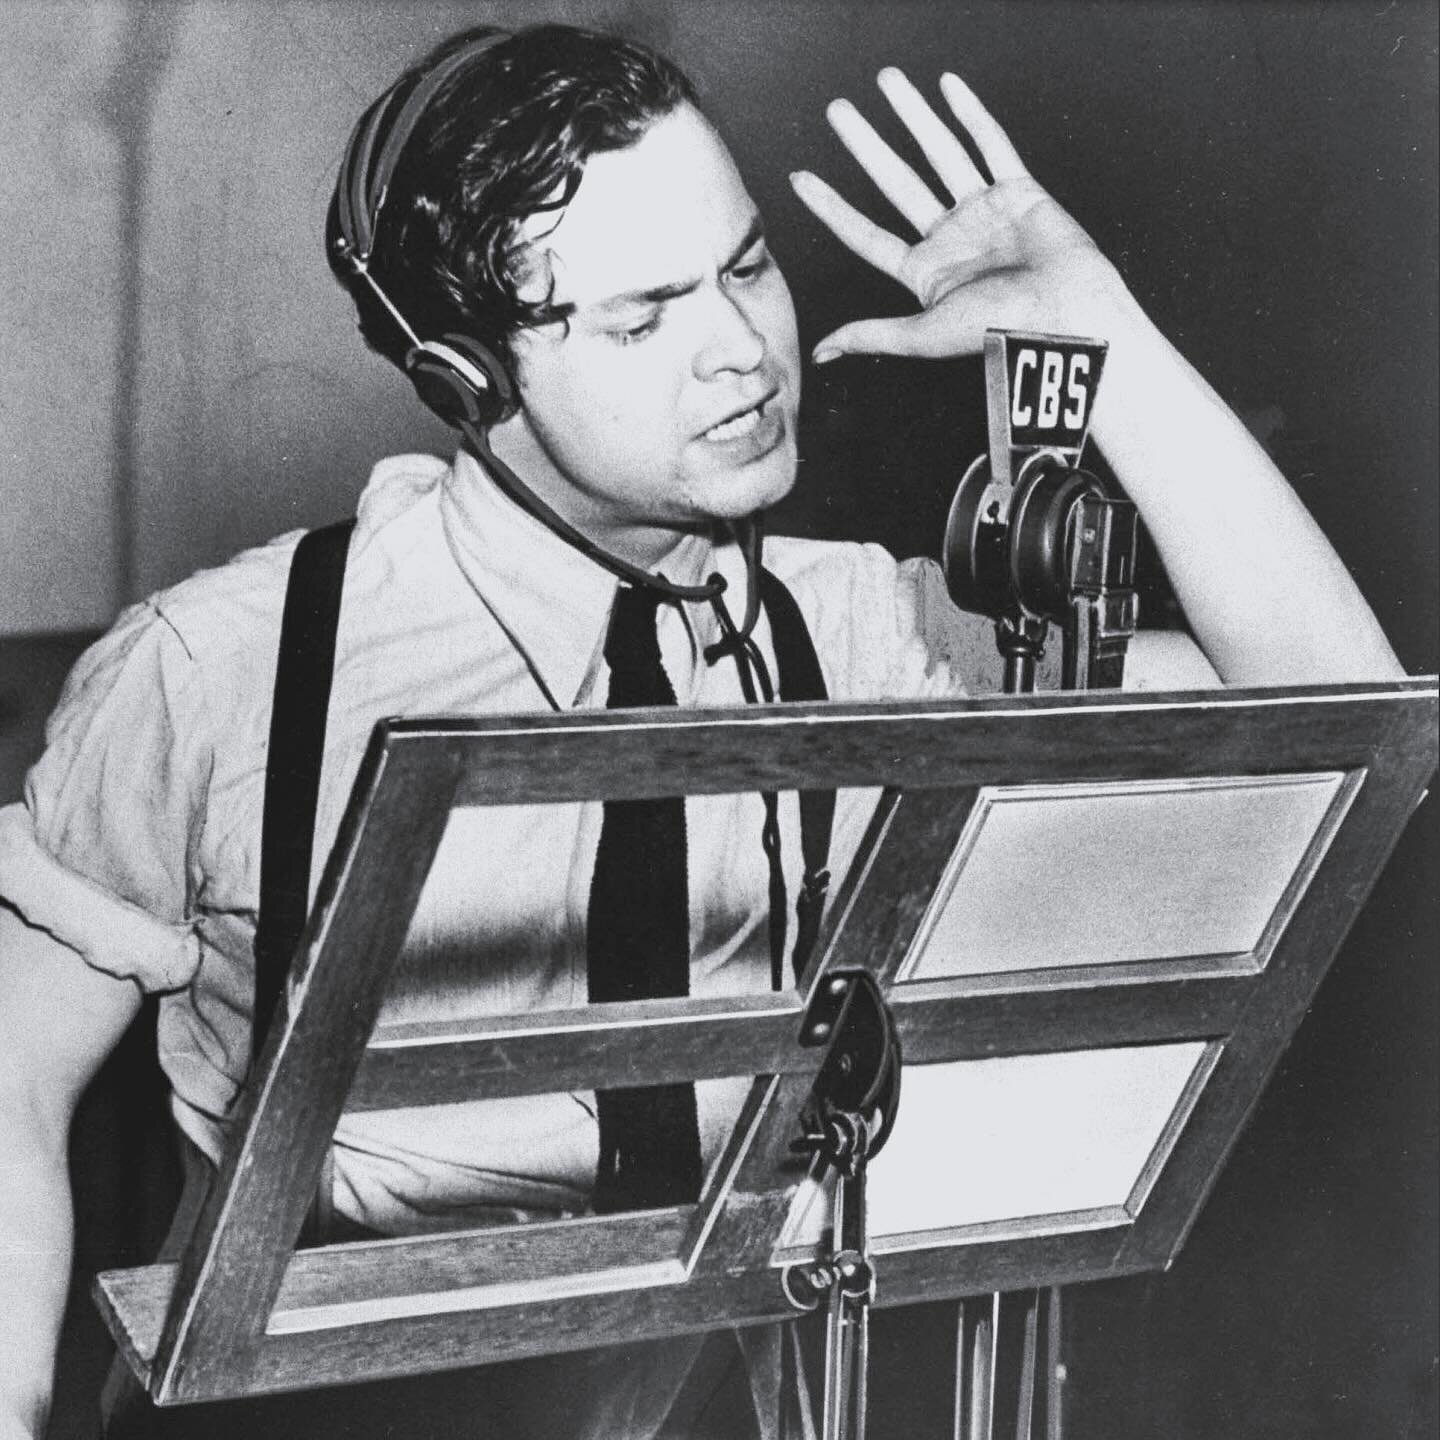 One of the reasons we love audio storytelling is because it connects us to history! Audio storytelling traces back to the late 19th century with the advent of radio broadcasting. Initially, radio was primarily used for news updates and music broadcas